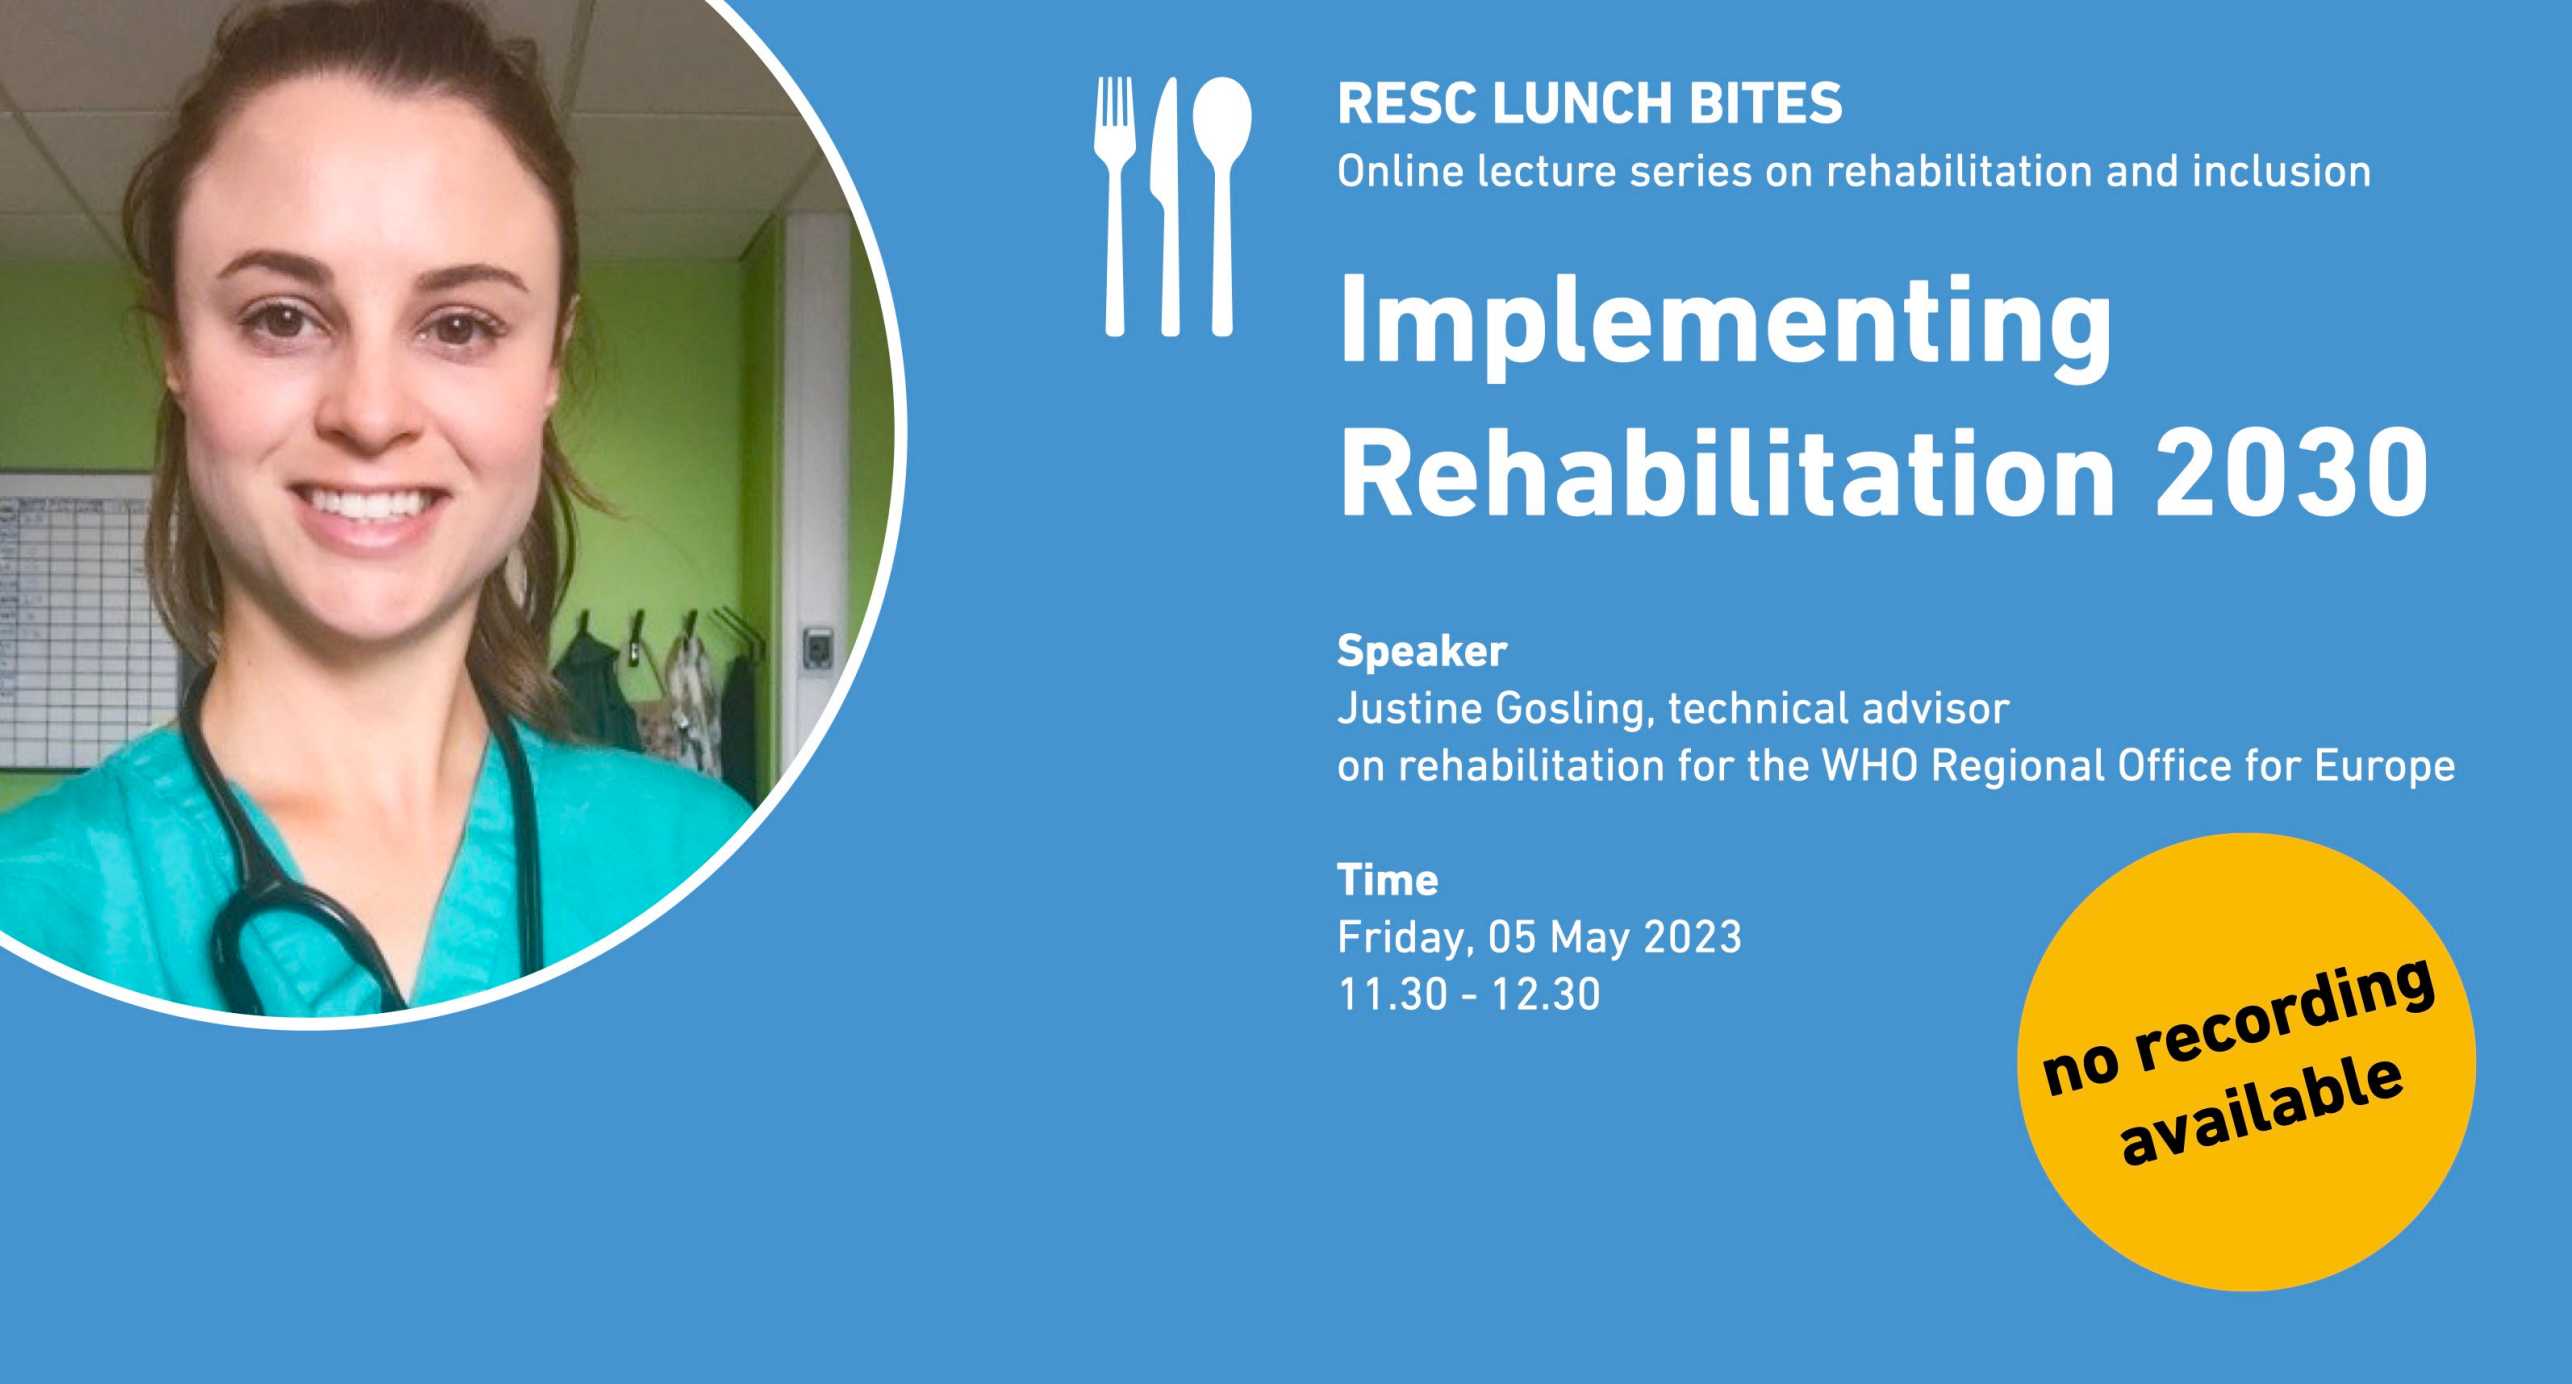 RESC Lunch Bites Online Lecture Series Announcement with image of Justine gosling. There is no recording available